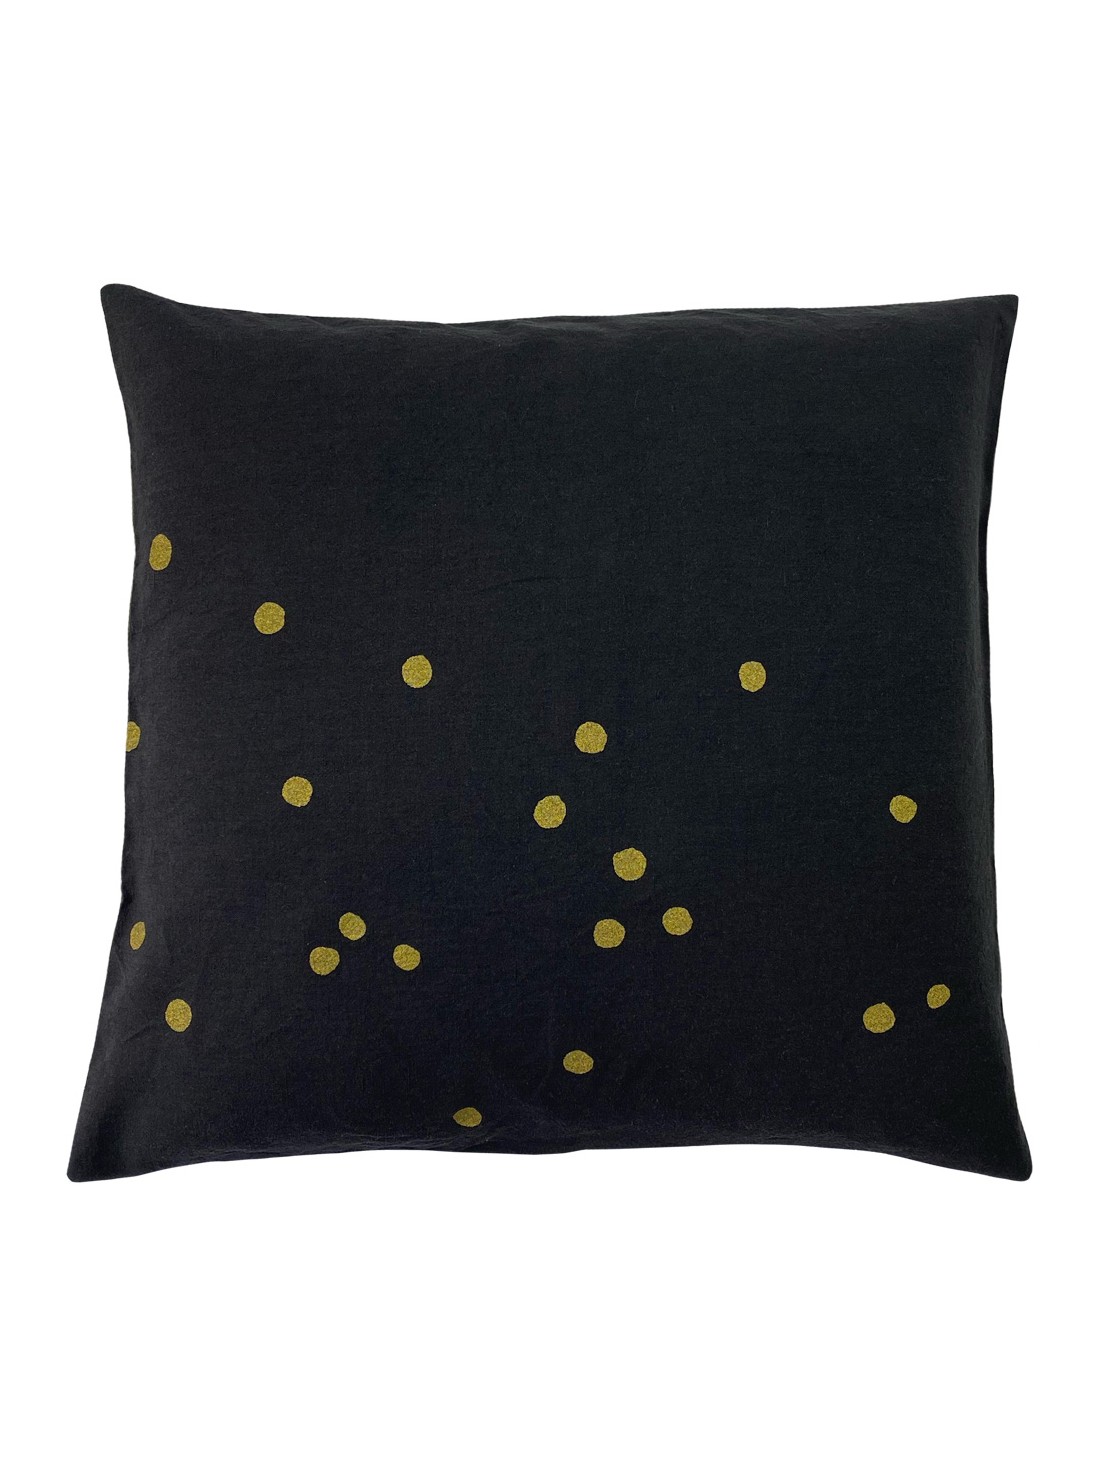 Cushion cover Lina linen and cottonNo Waste caviar 50